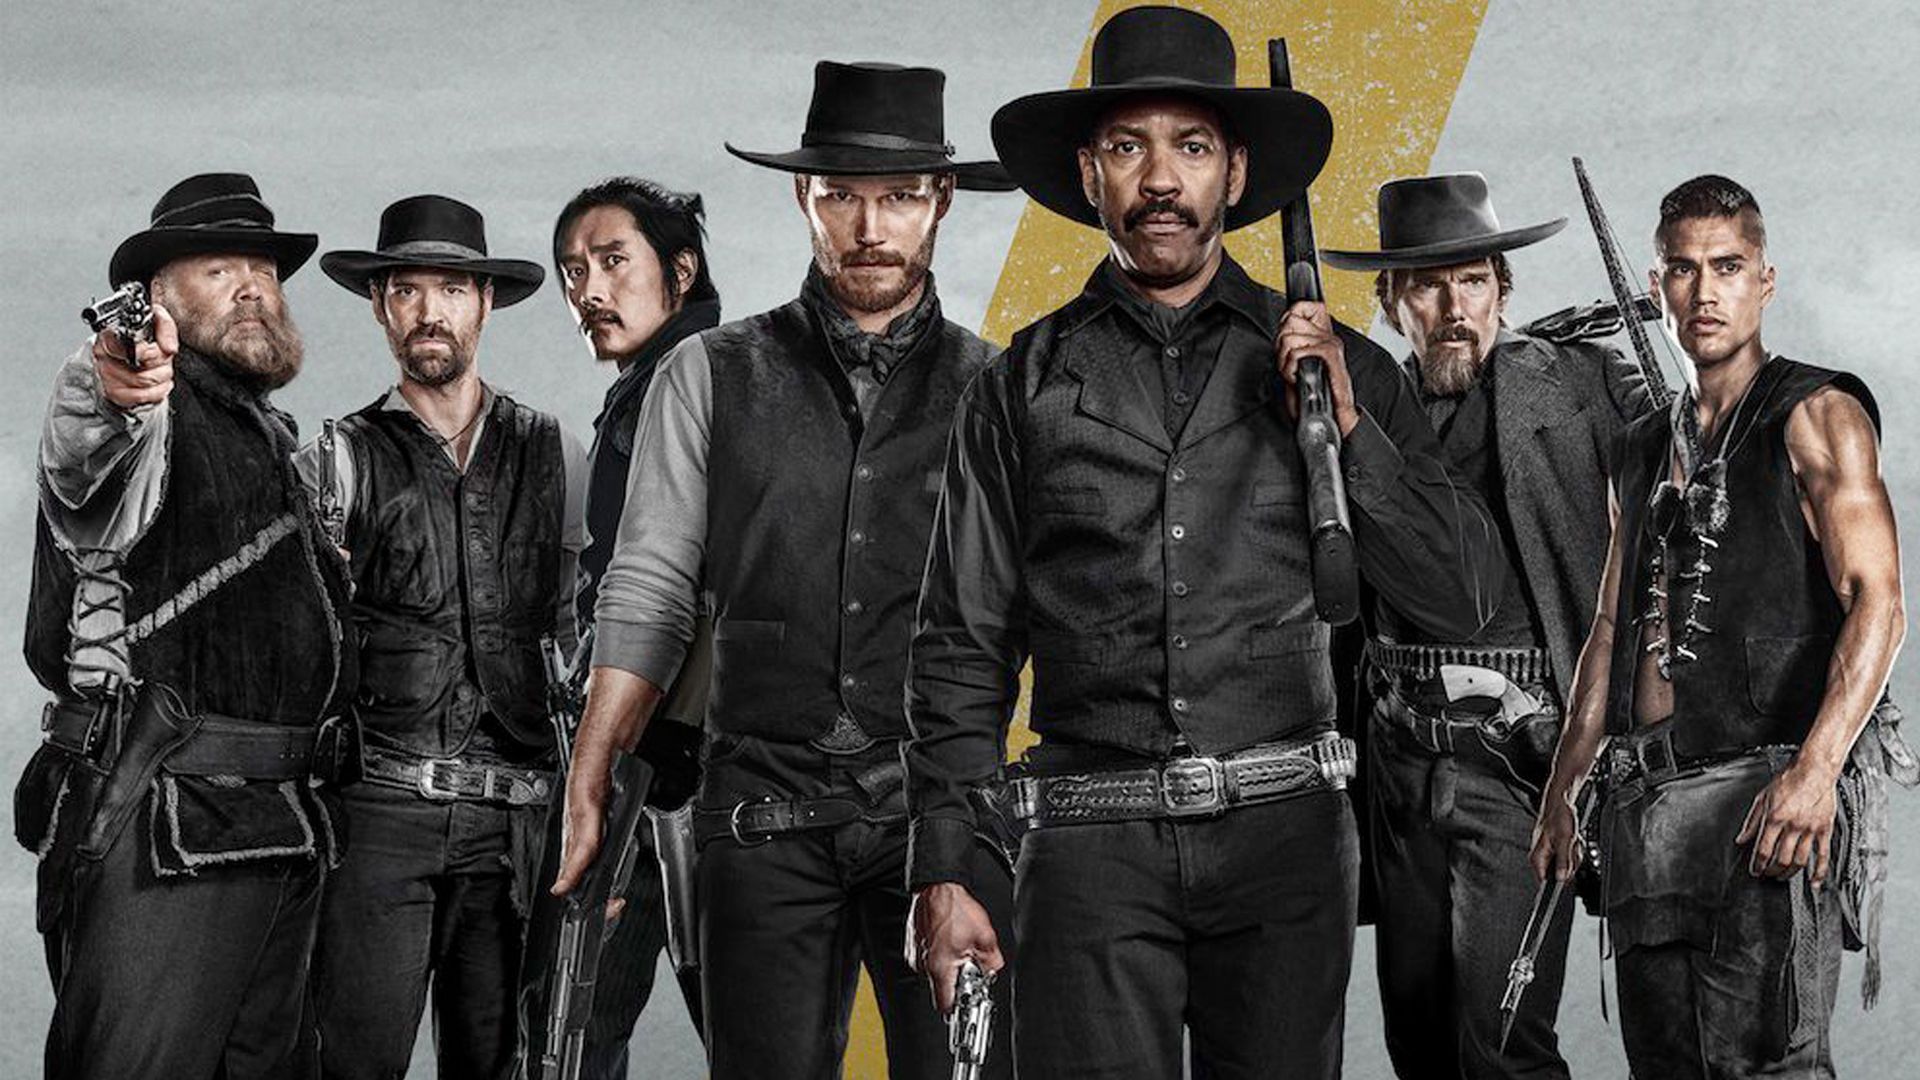 Review: THE MAGNIFICENT SEVEN is a Major Misfire